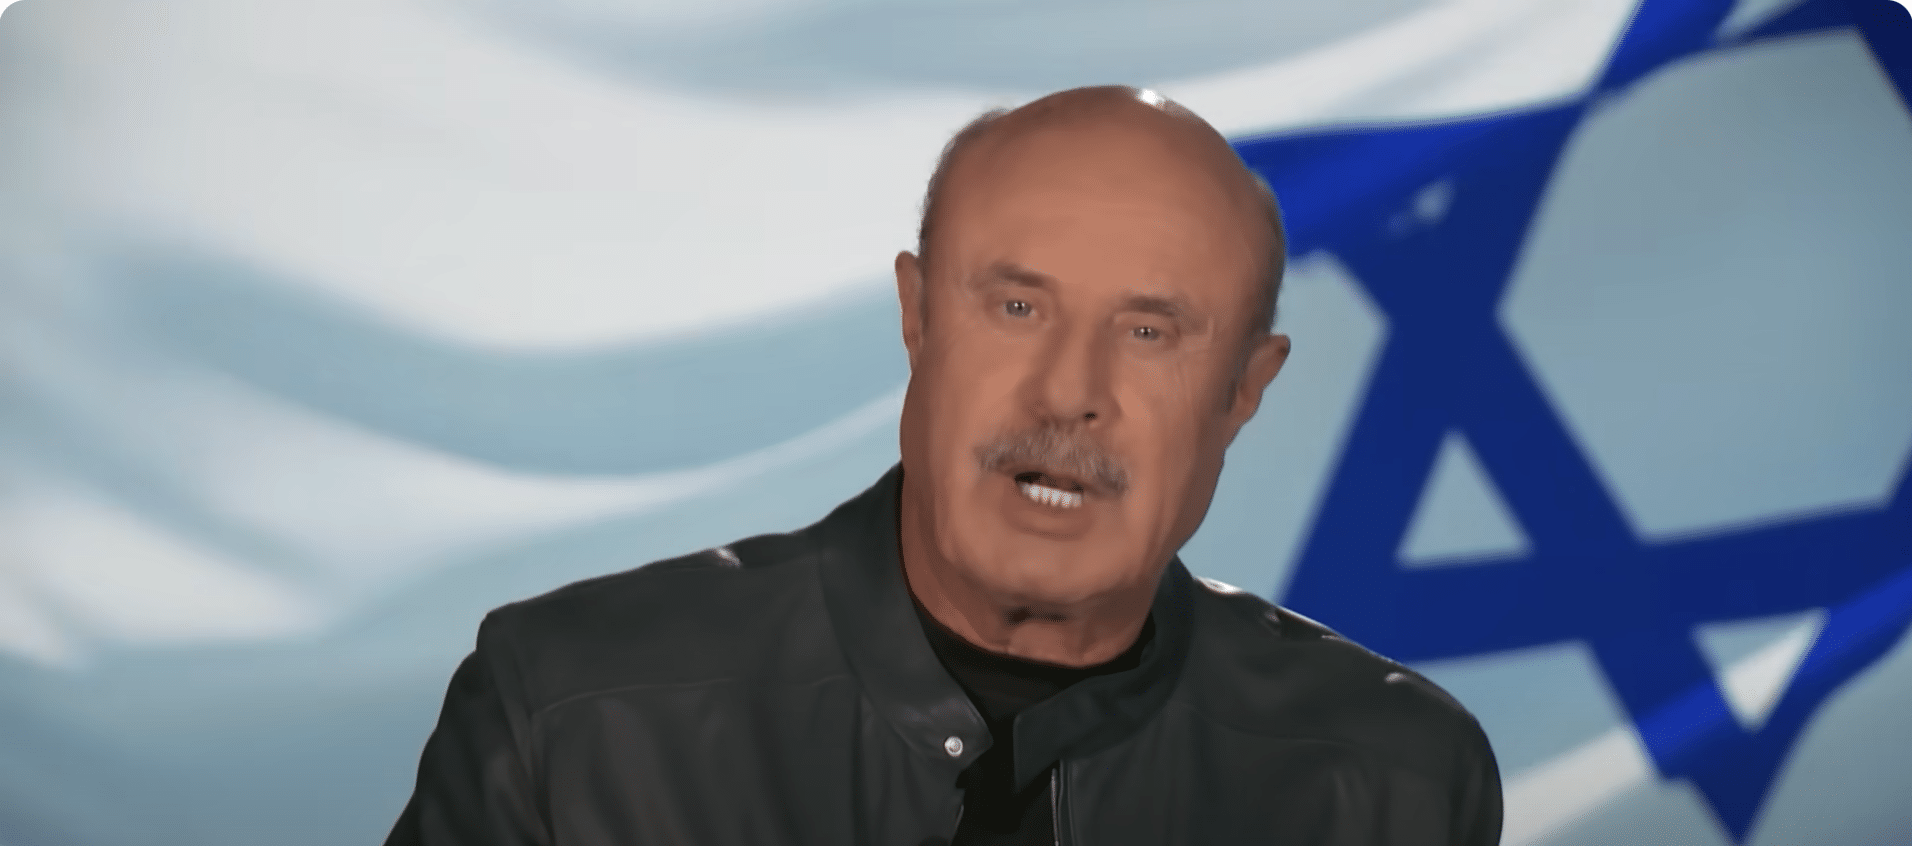 (WATCH) Outraged, Dr. Phil slams University Presidents for their open display of Anti-Semitism